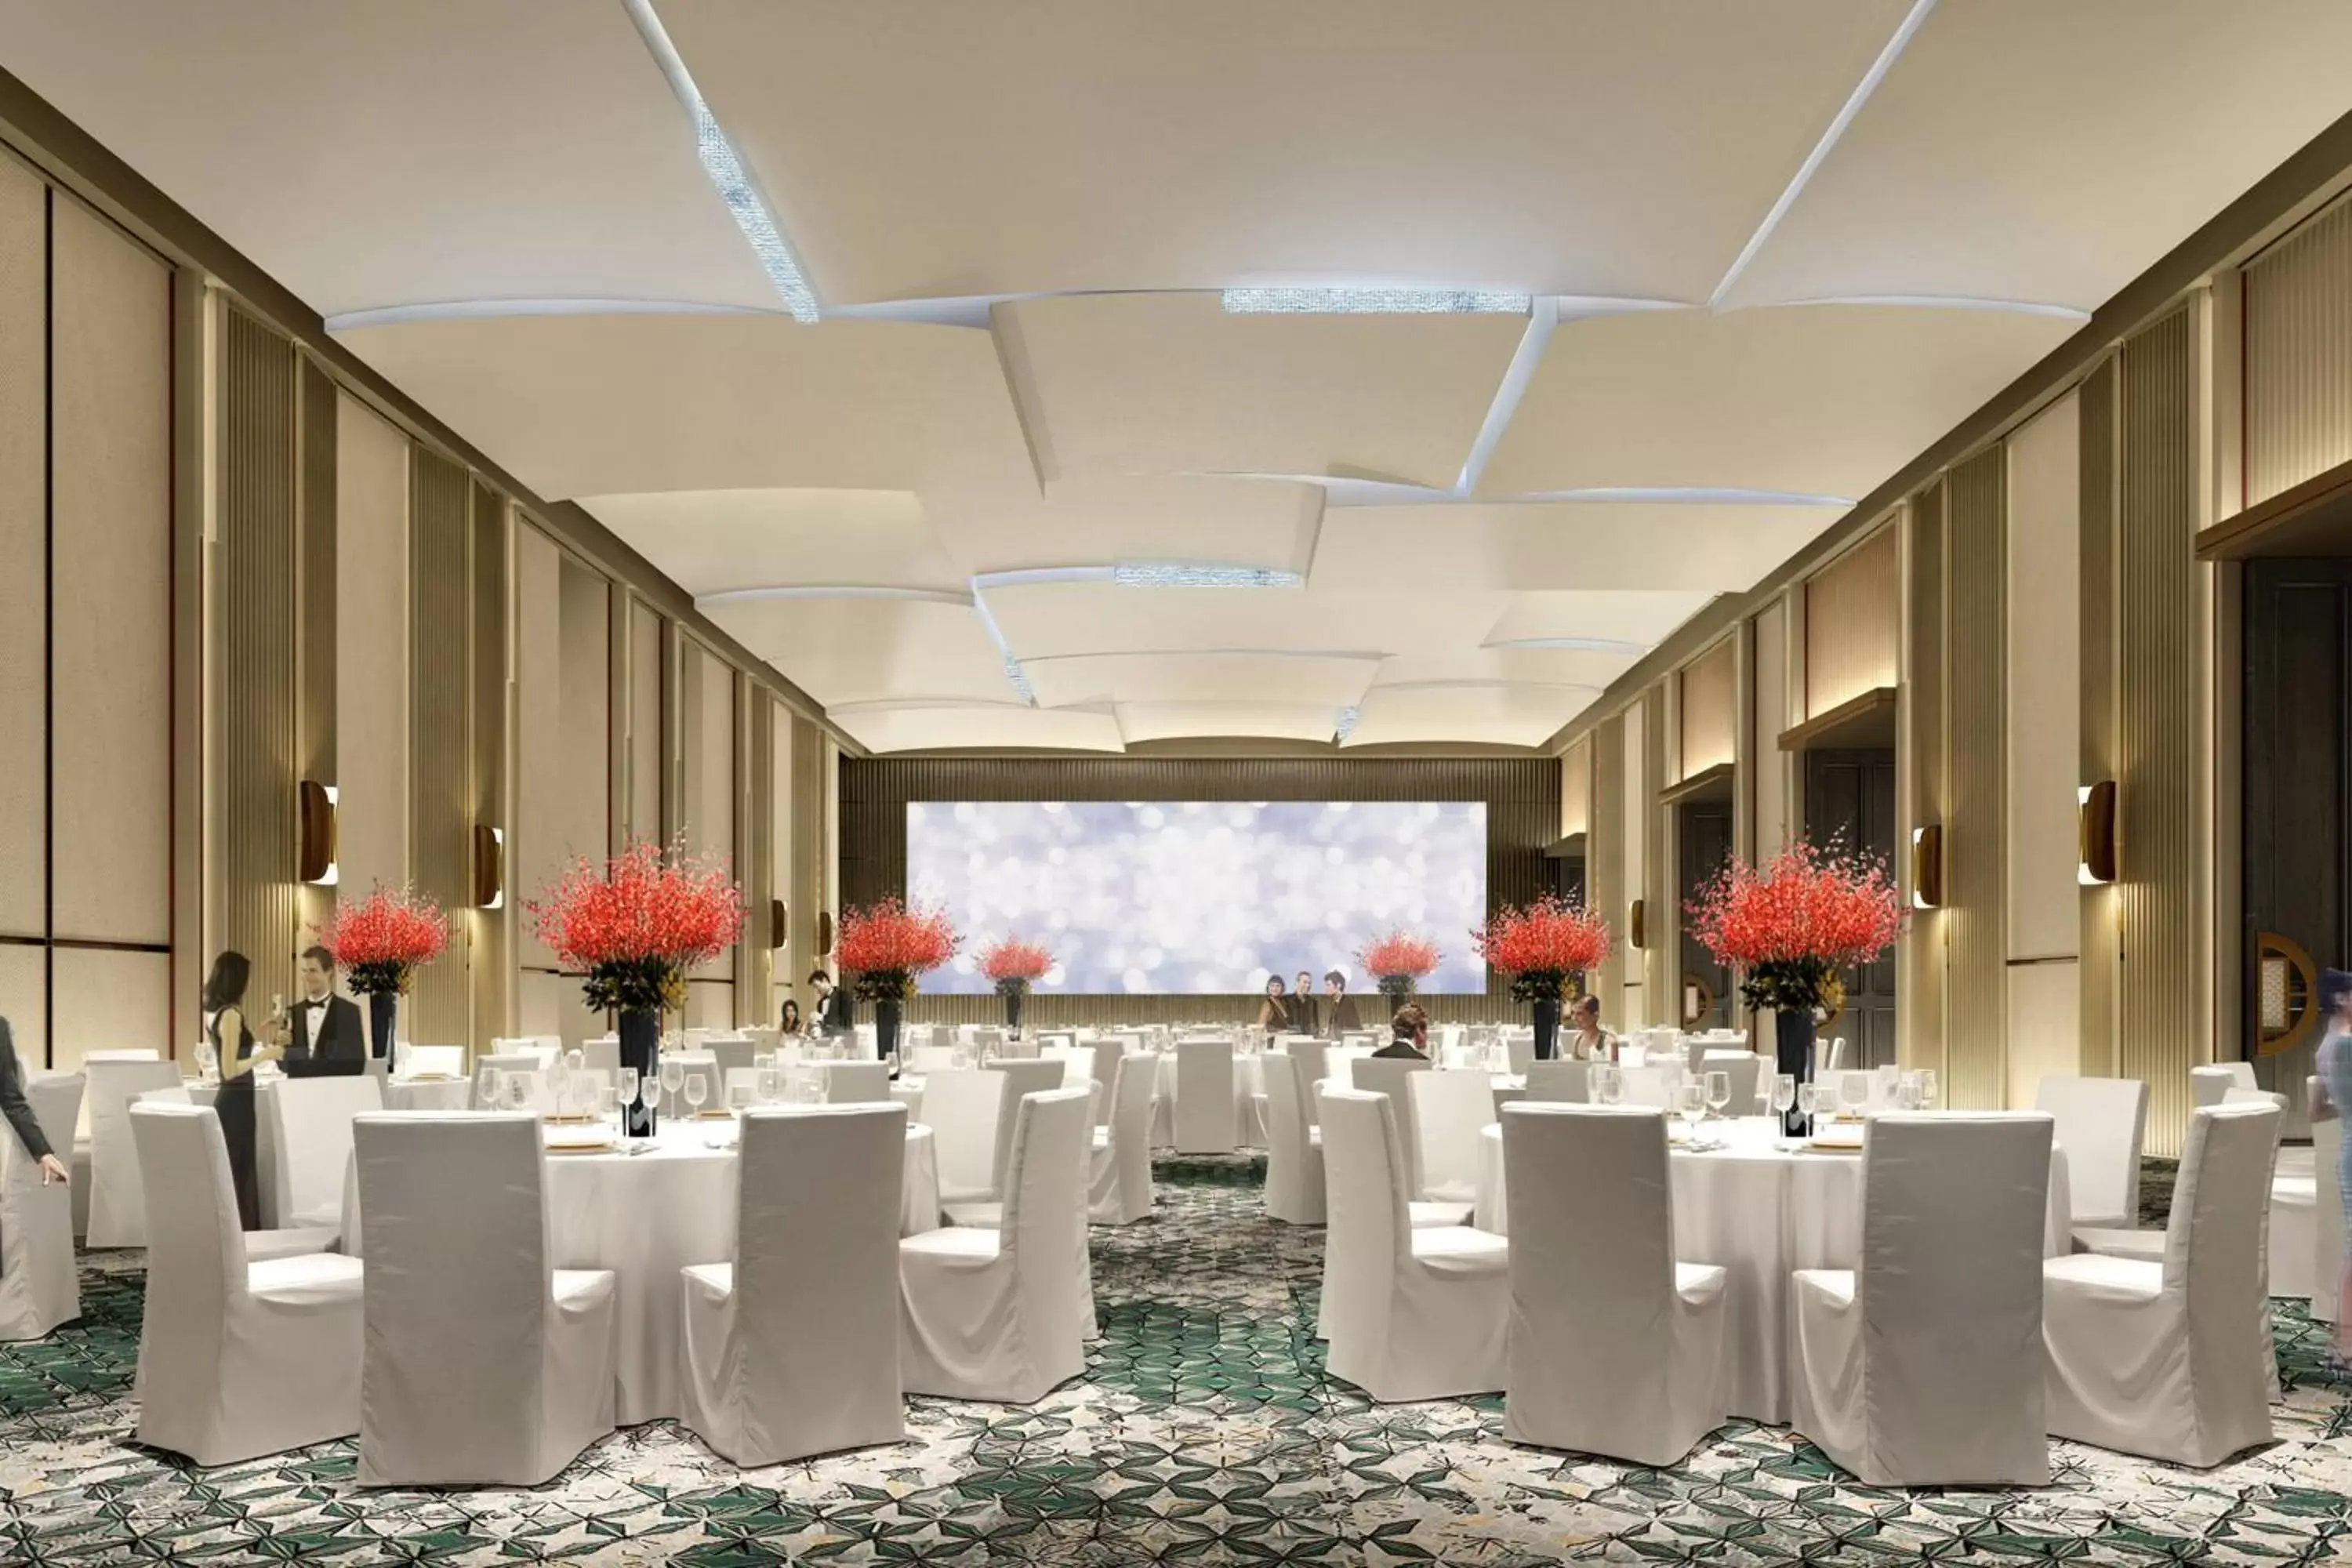 Meeting/conference room, Banquet Facilities in Courtyard by Marriott Luoyang